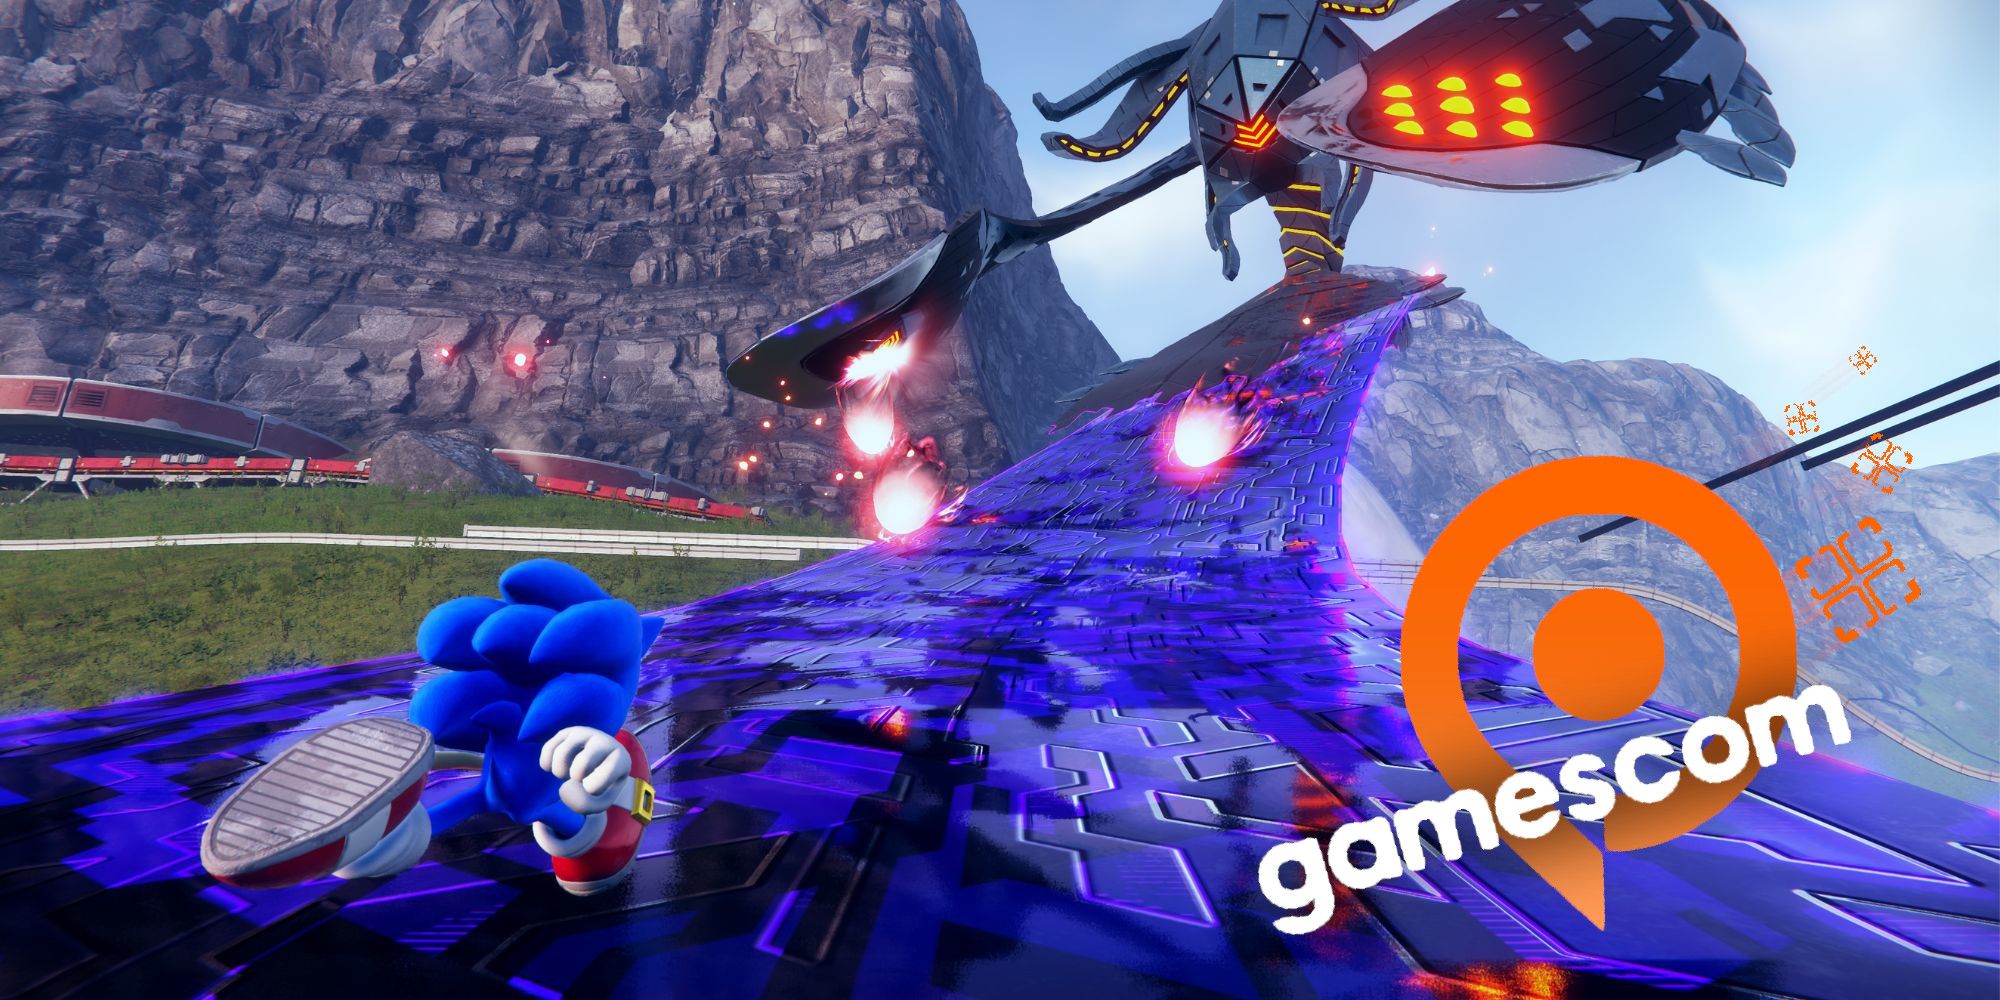 Sonic Frontiers Gameplay Shows A Tiny Sonic Who Takes Down Giants - Gameranx